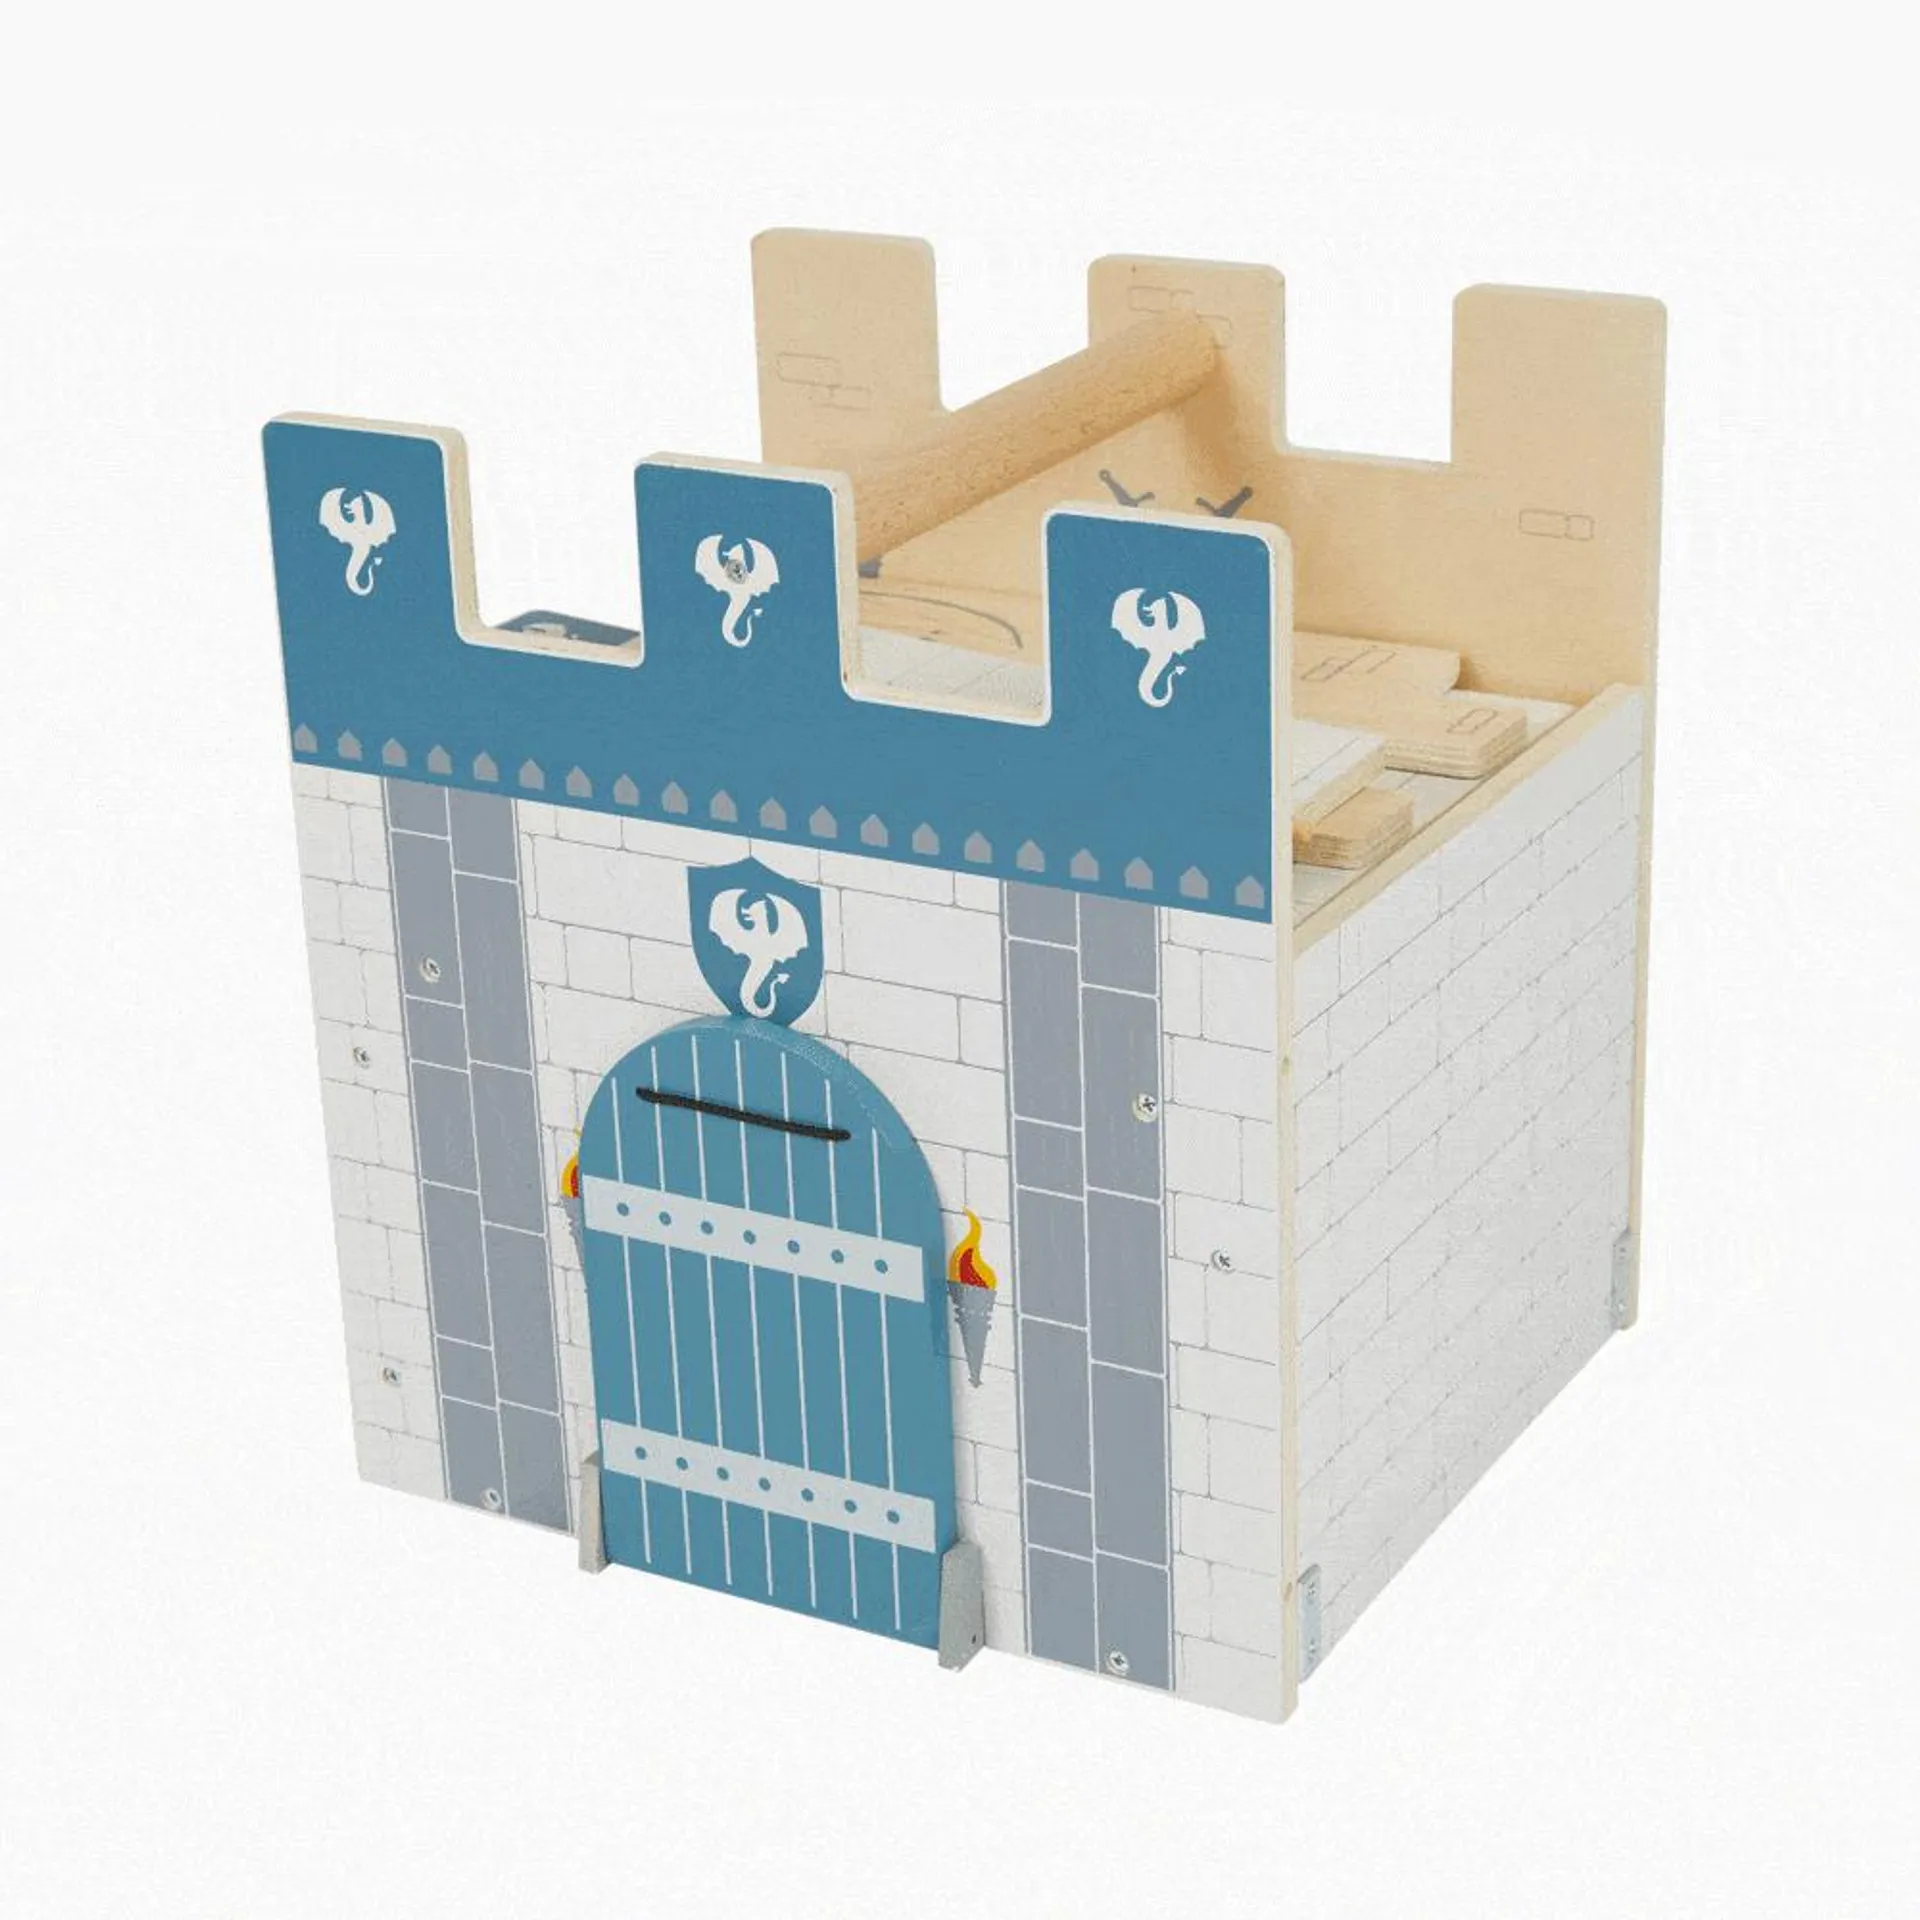 Play & Store Wooden Toy Castle